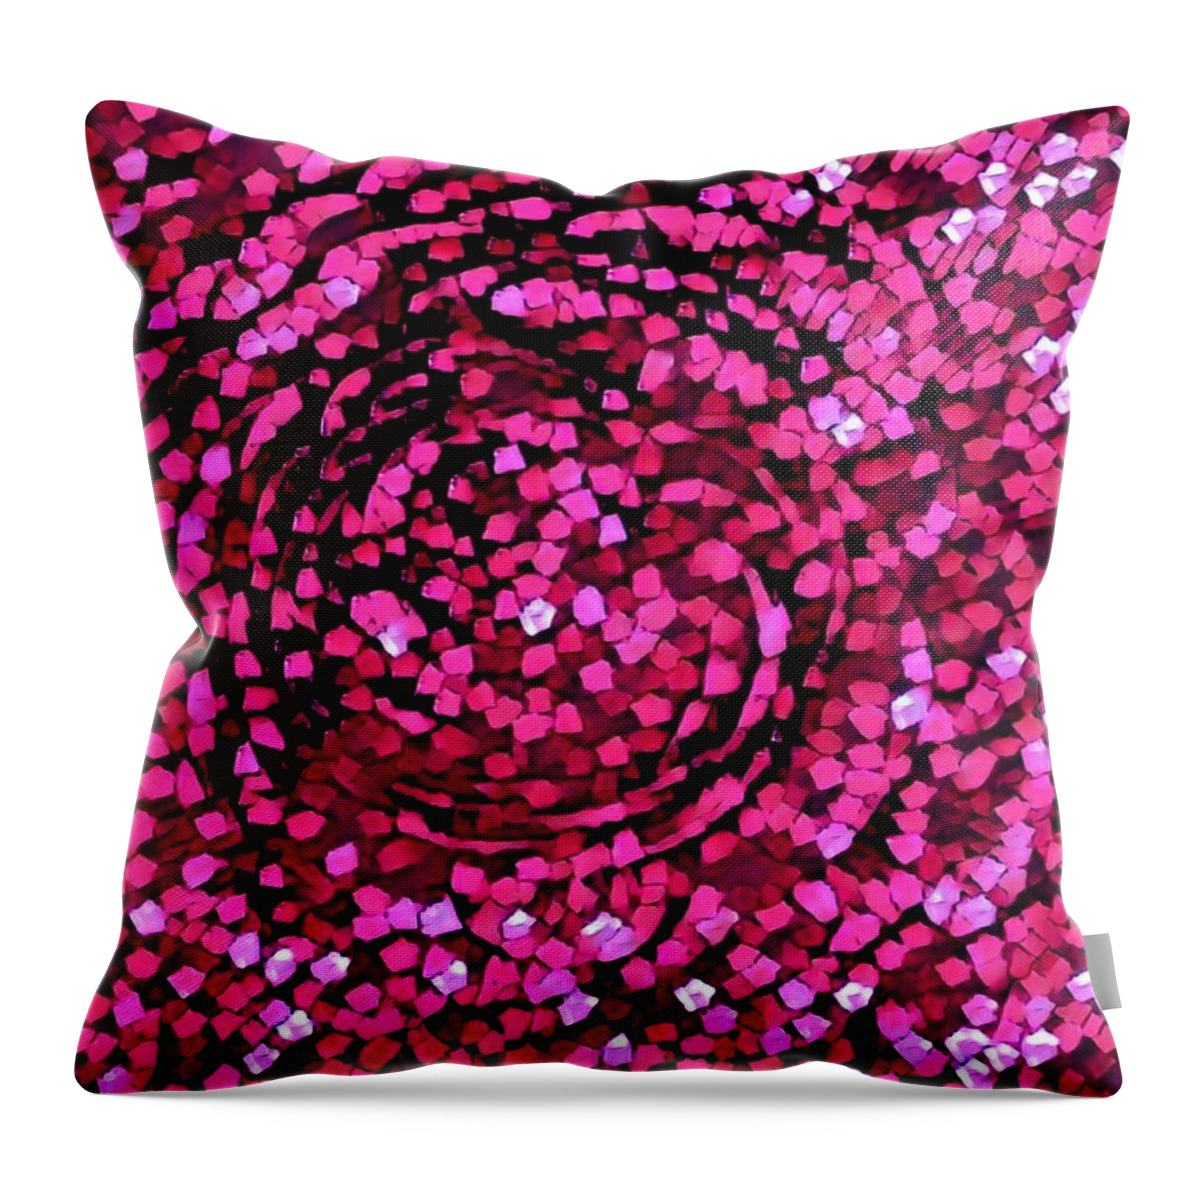  Throw Pillow featuring the photograph Sprinkles by Kimberly Woyak